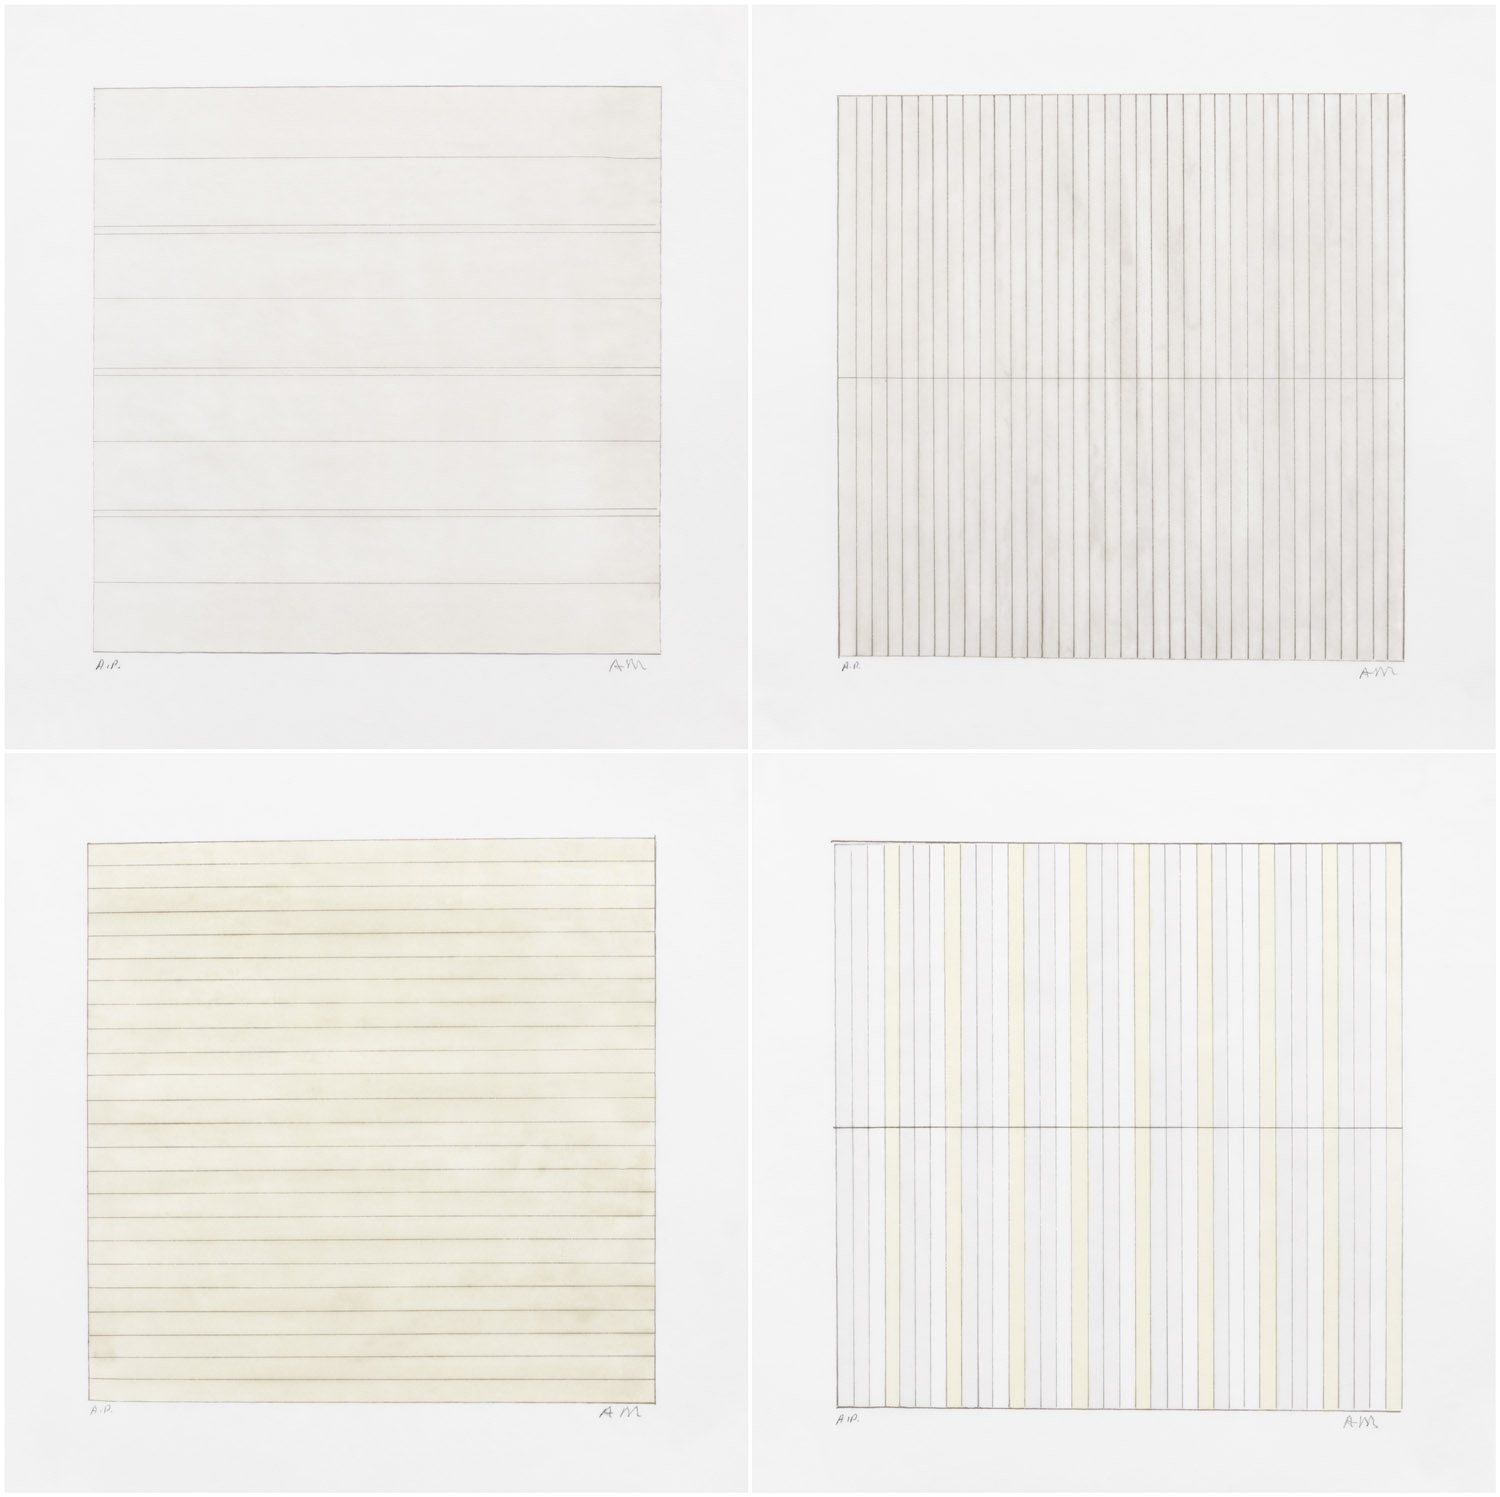 "Untitled" by Agnes Martin